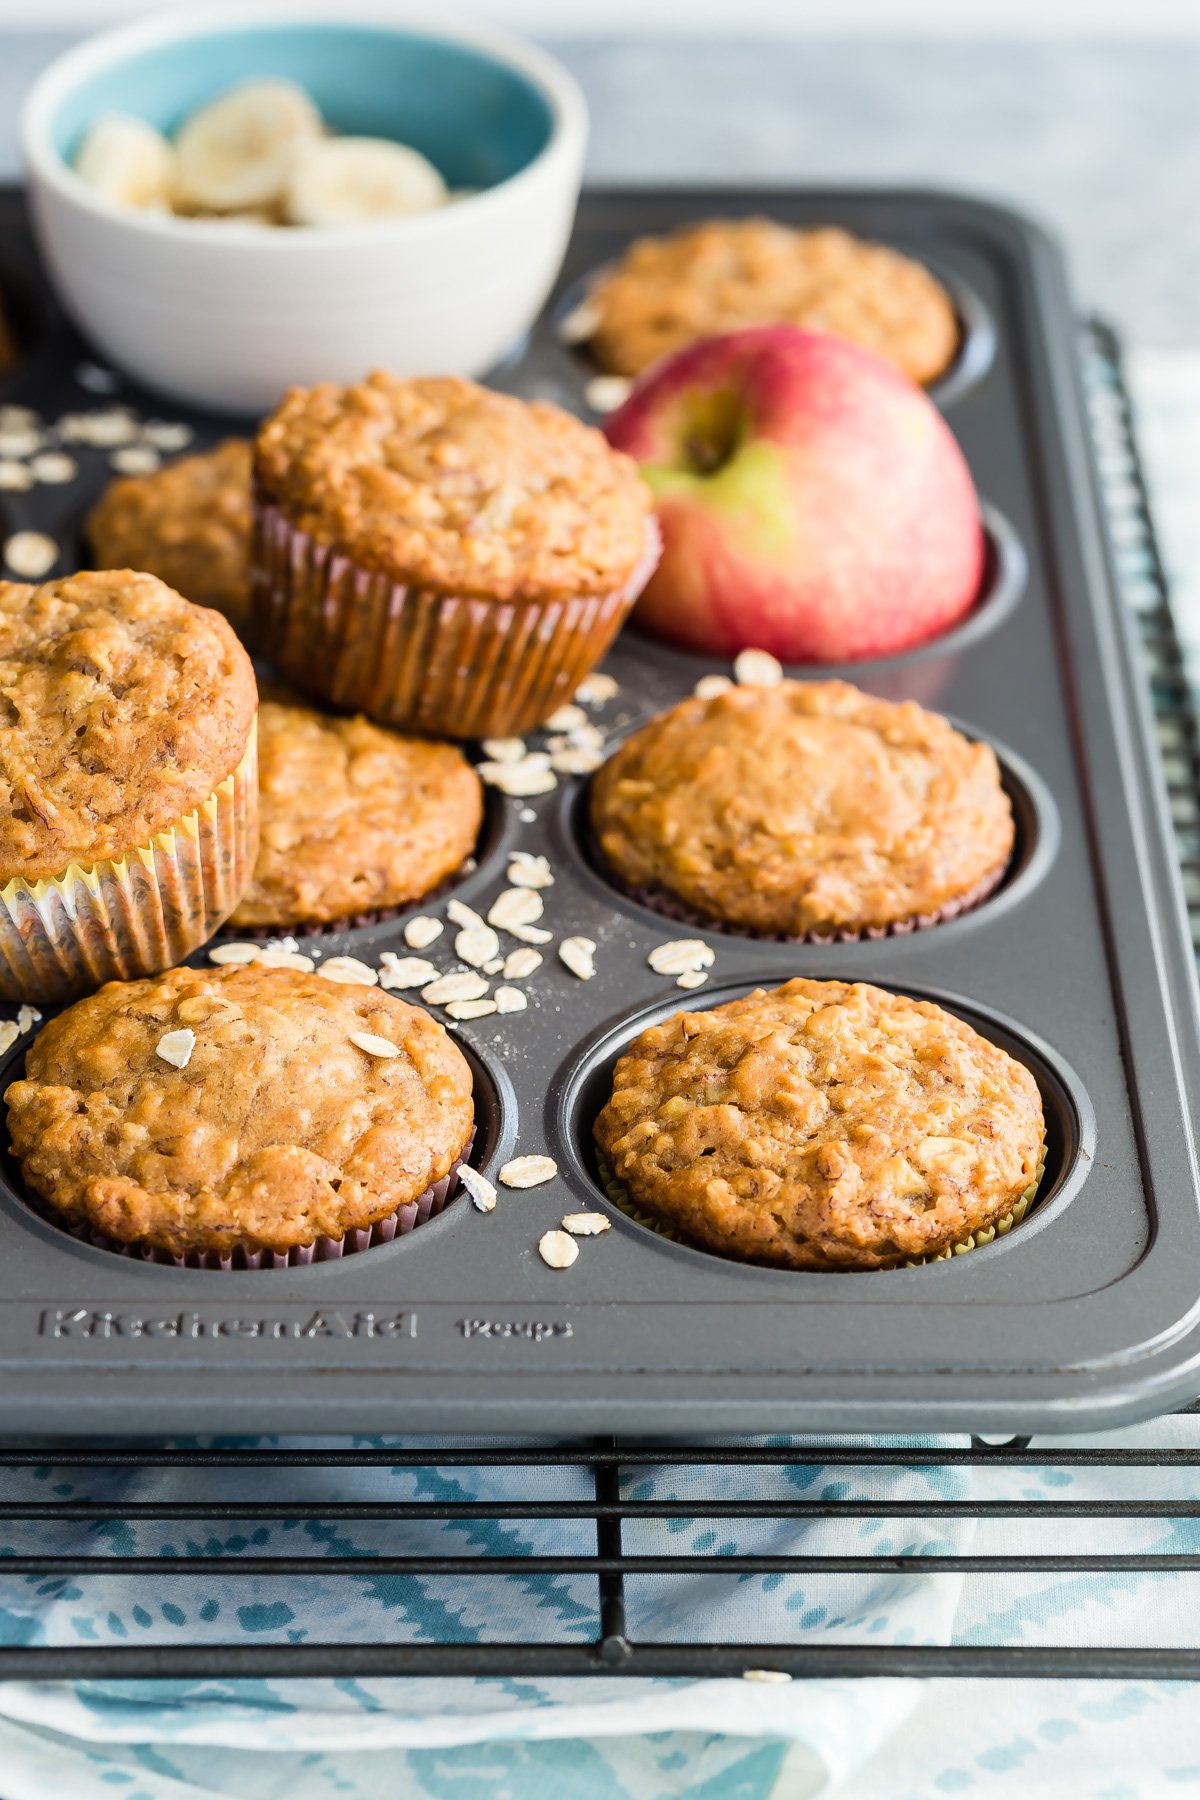 Apple Banana Muffins from Weelicious.com